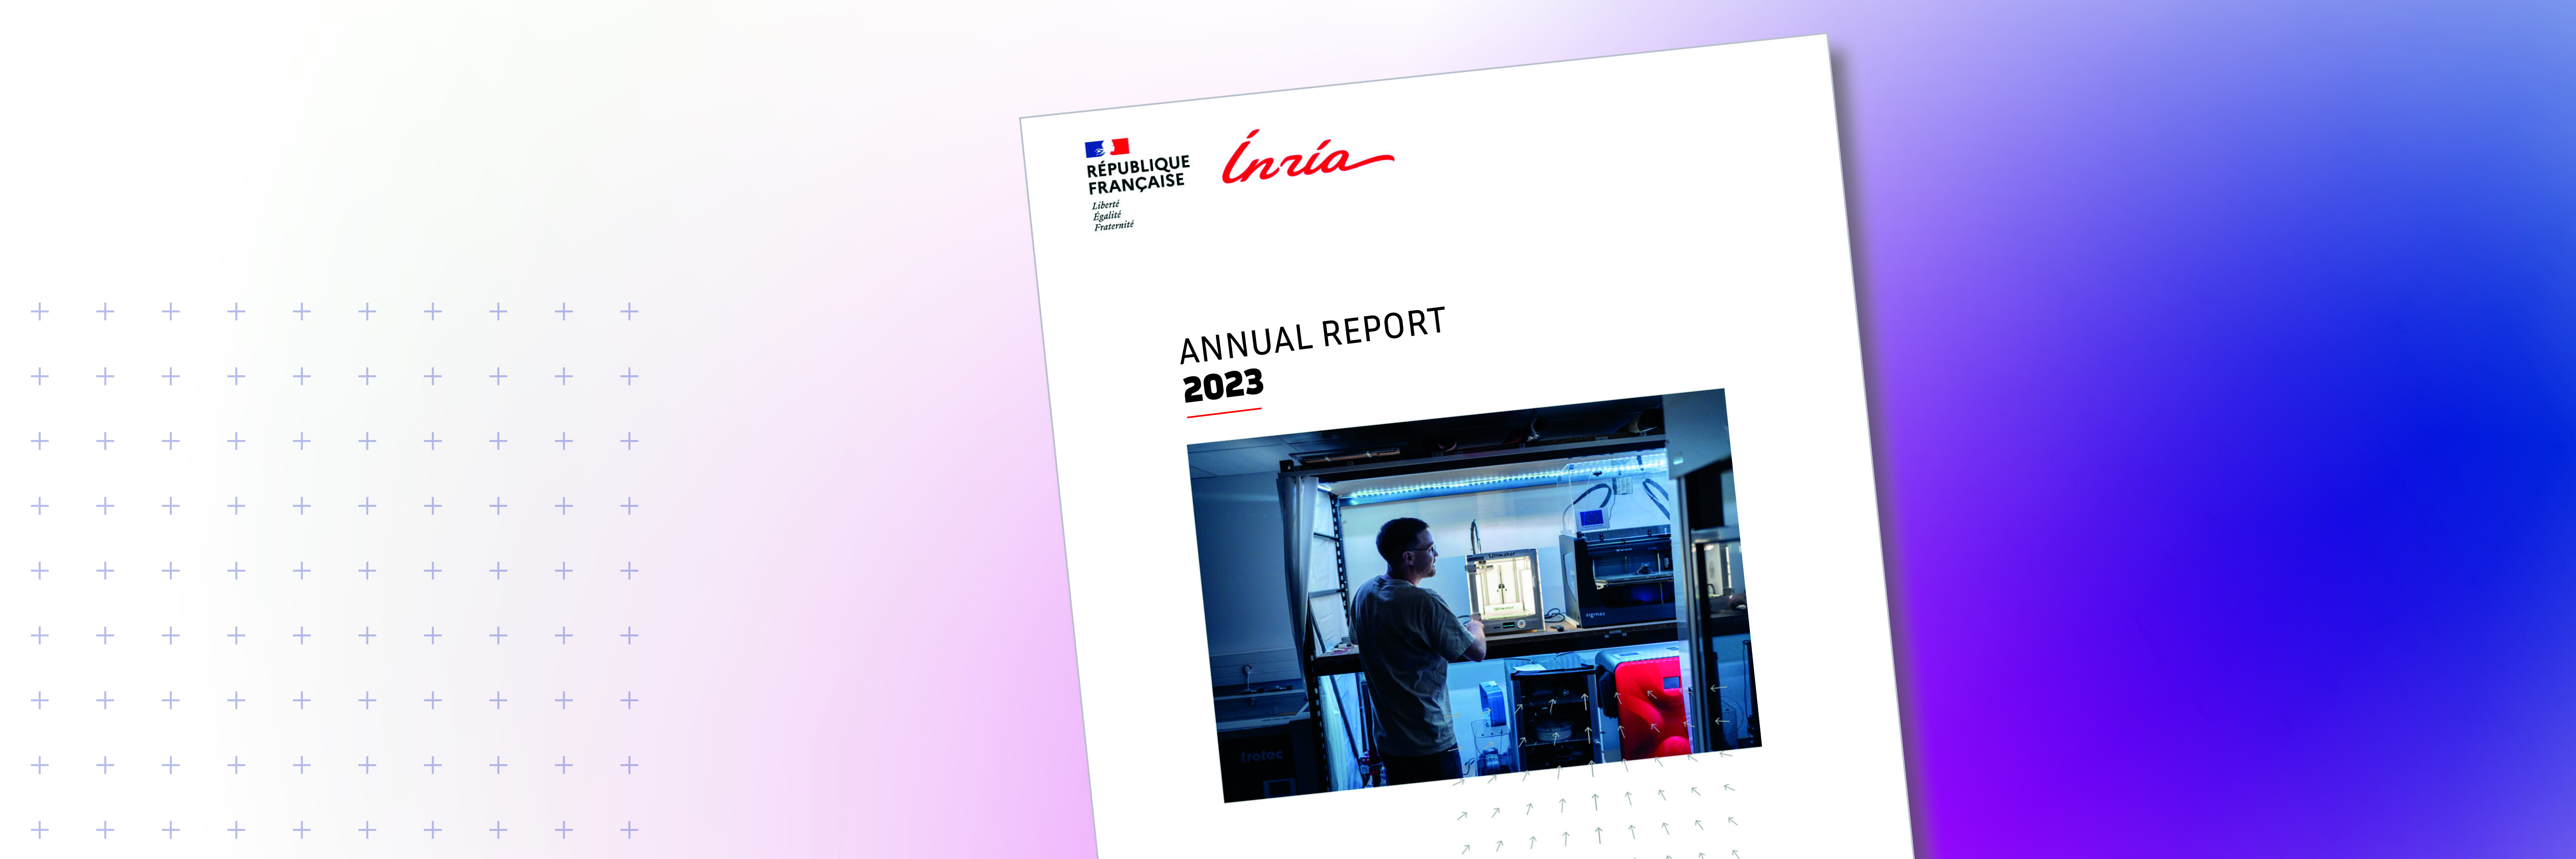 Banner 2023 Annual Report